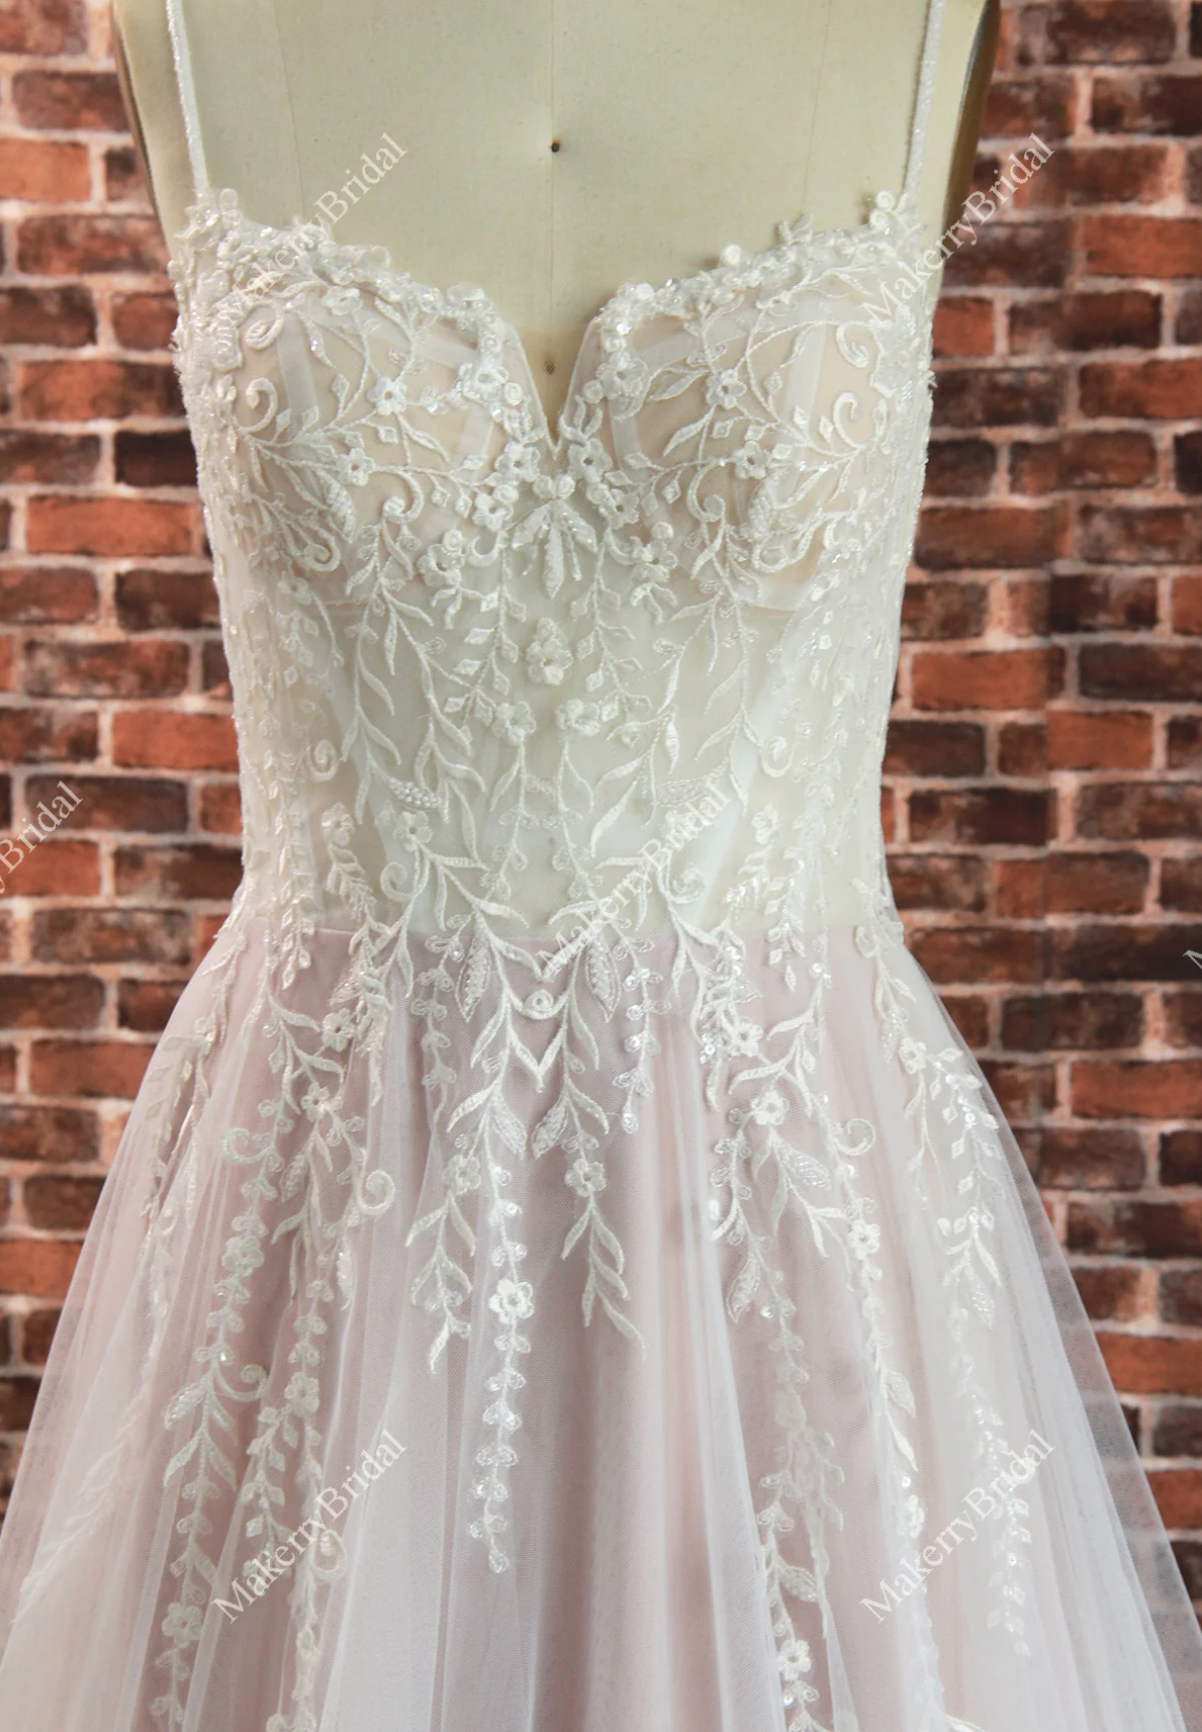 Beautiful Ethereal A-Line Wedding Dress with Spaghetti Straps